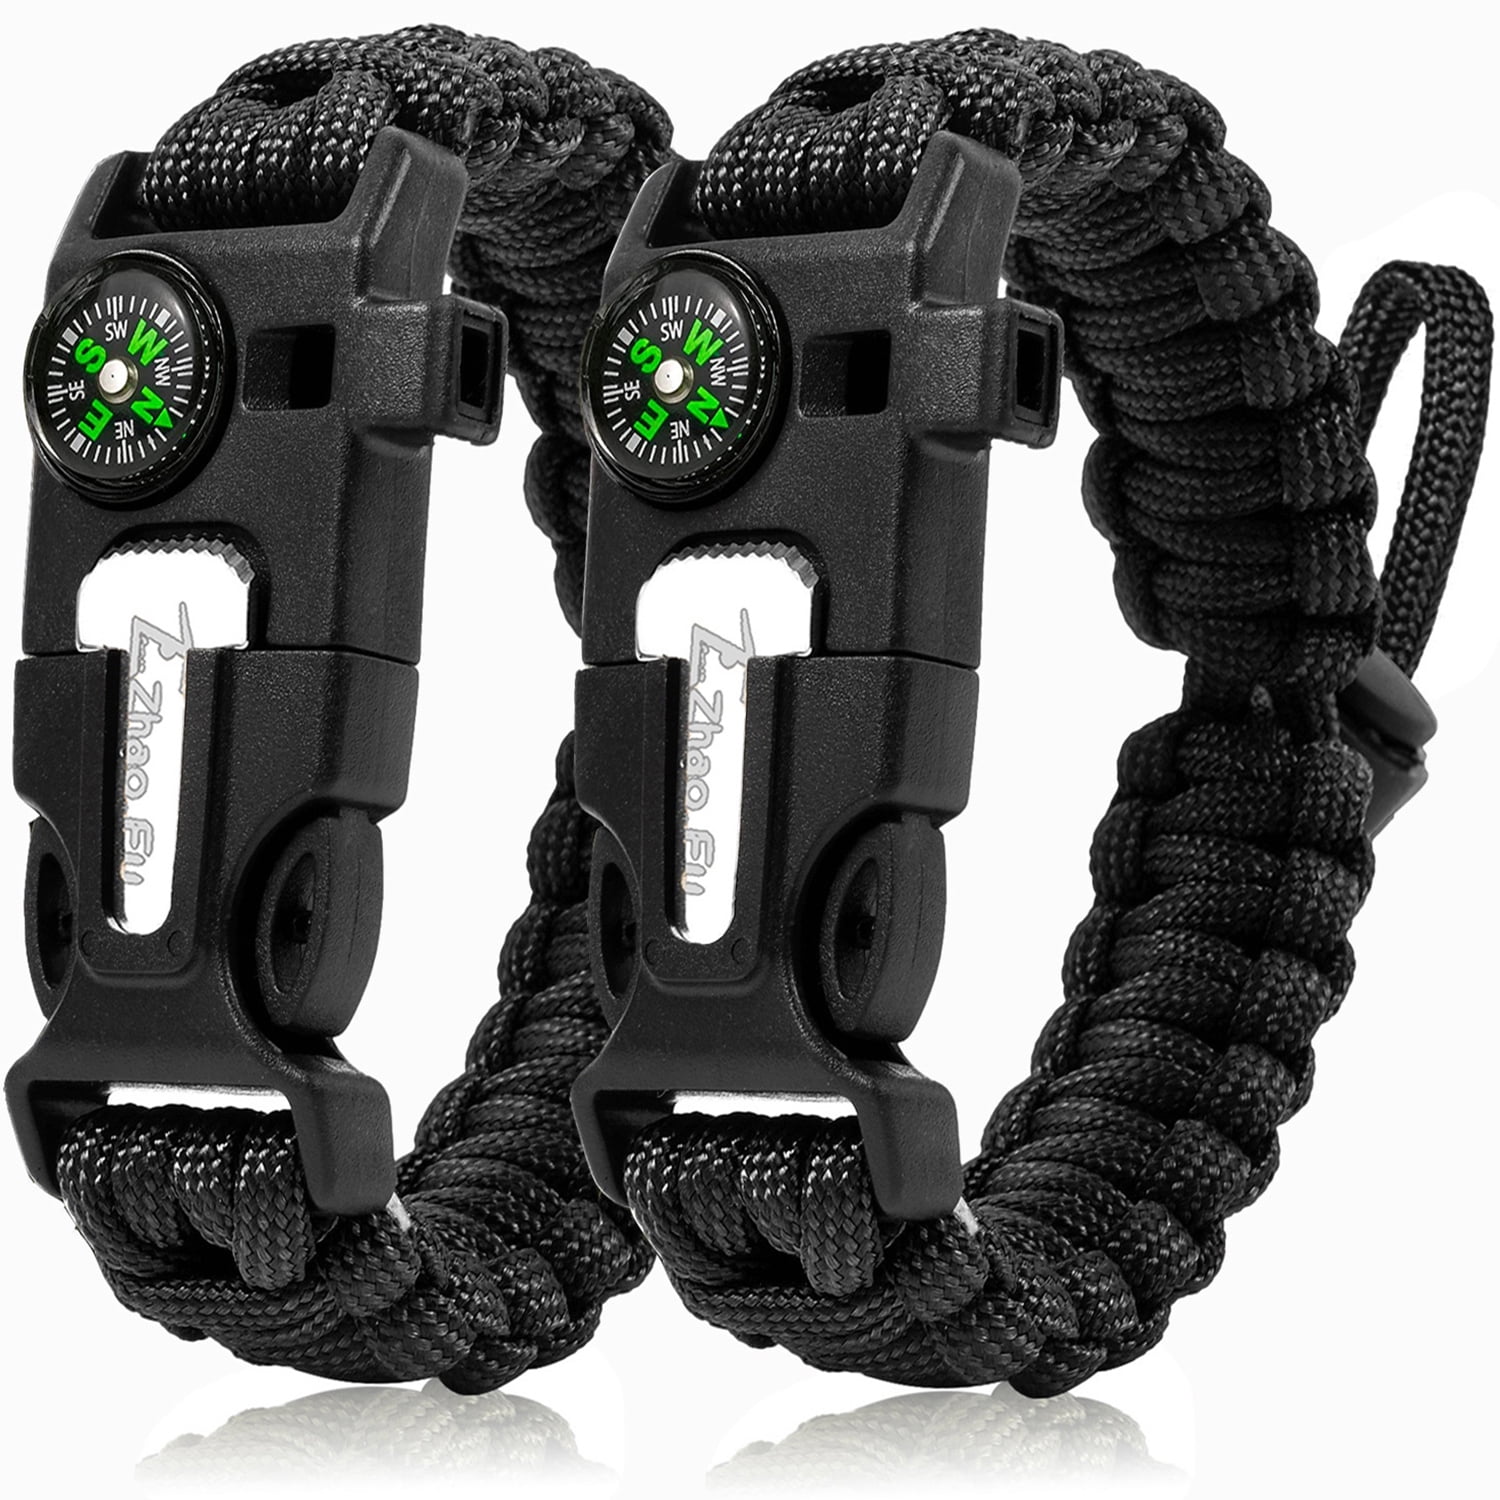 Paracord Survival Bracelet  Flint Fire Starter  Whistle  Compass  Mini  Saw  Strong Rescue Rope  Adjustable Band Size  Camping  Bushcraft   Emergency Kit Black  Walmartcom